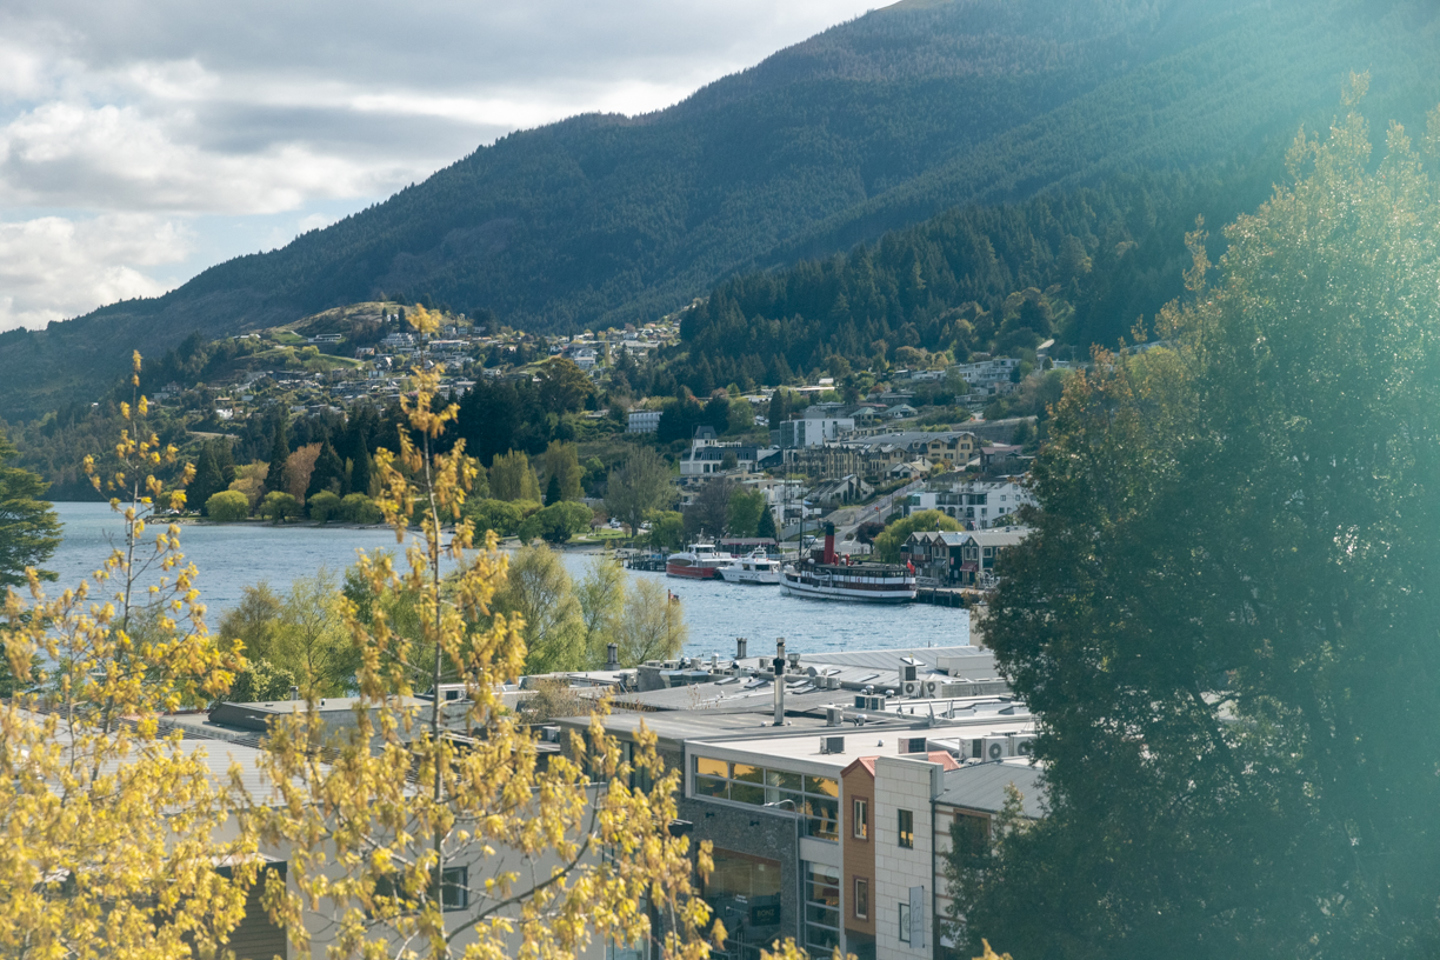 A photo overlooking Lake Wakatipu with trees and the CBD in the foreground.